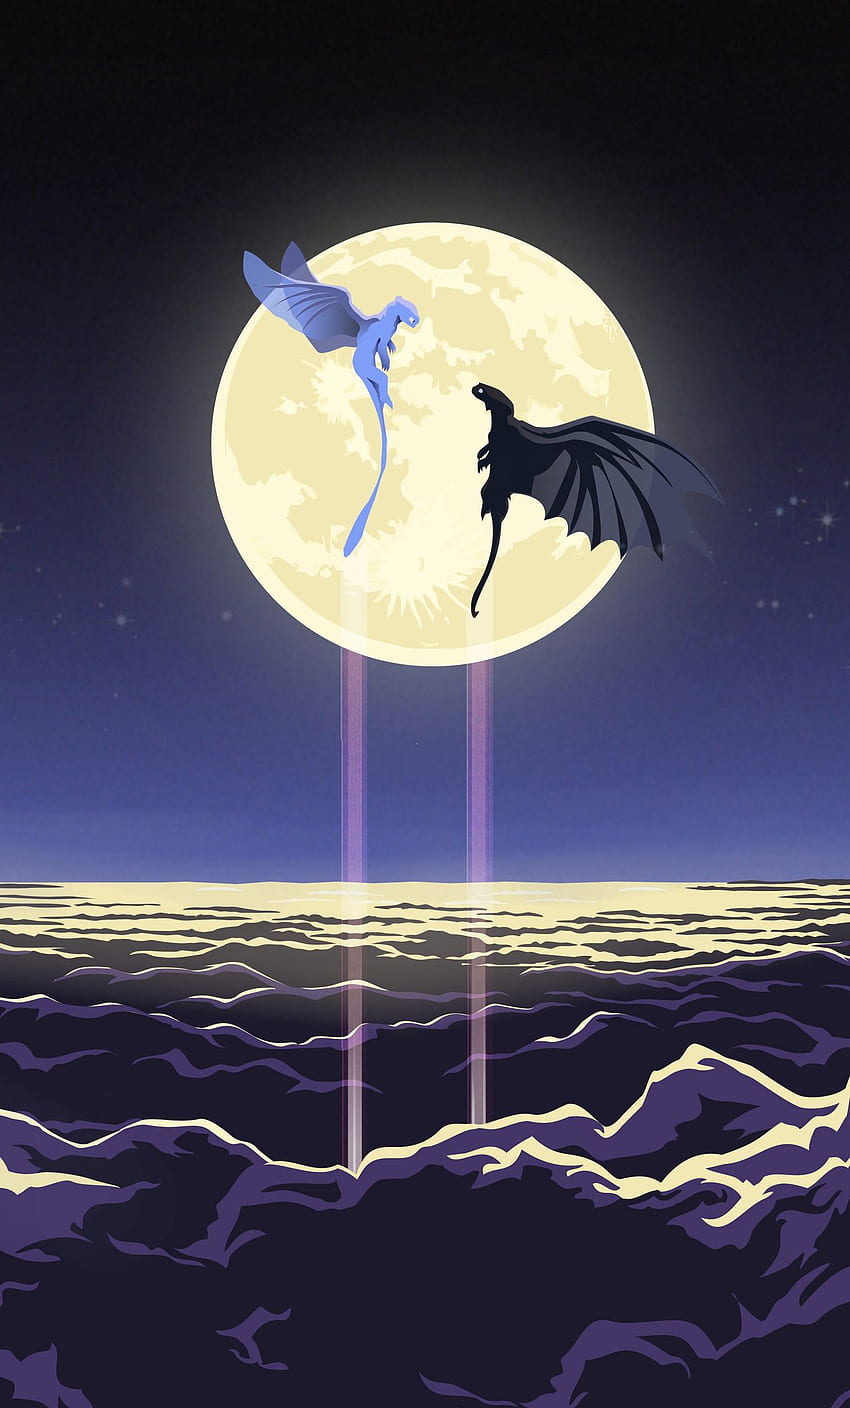 Download wallpaper 750x1334 toothless and light fury, dragons, moon,  artwork, iphone 7, iphone 8, 750x1334 hd background, 19781